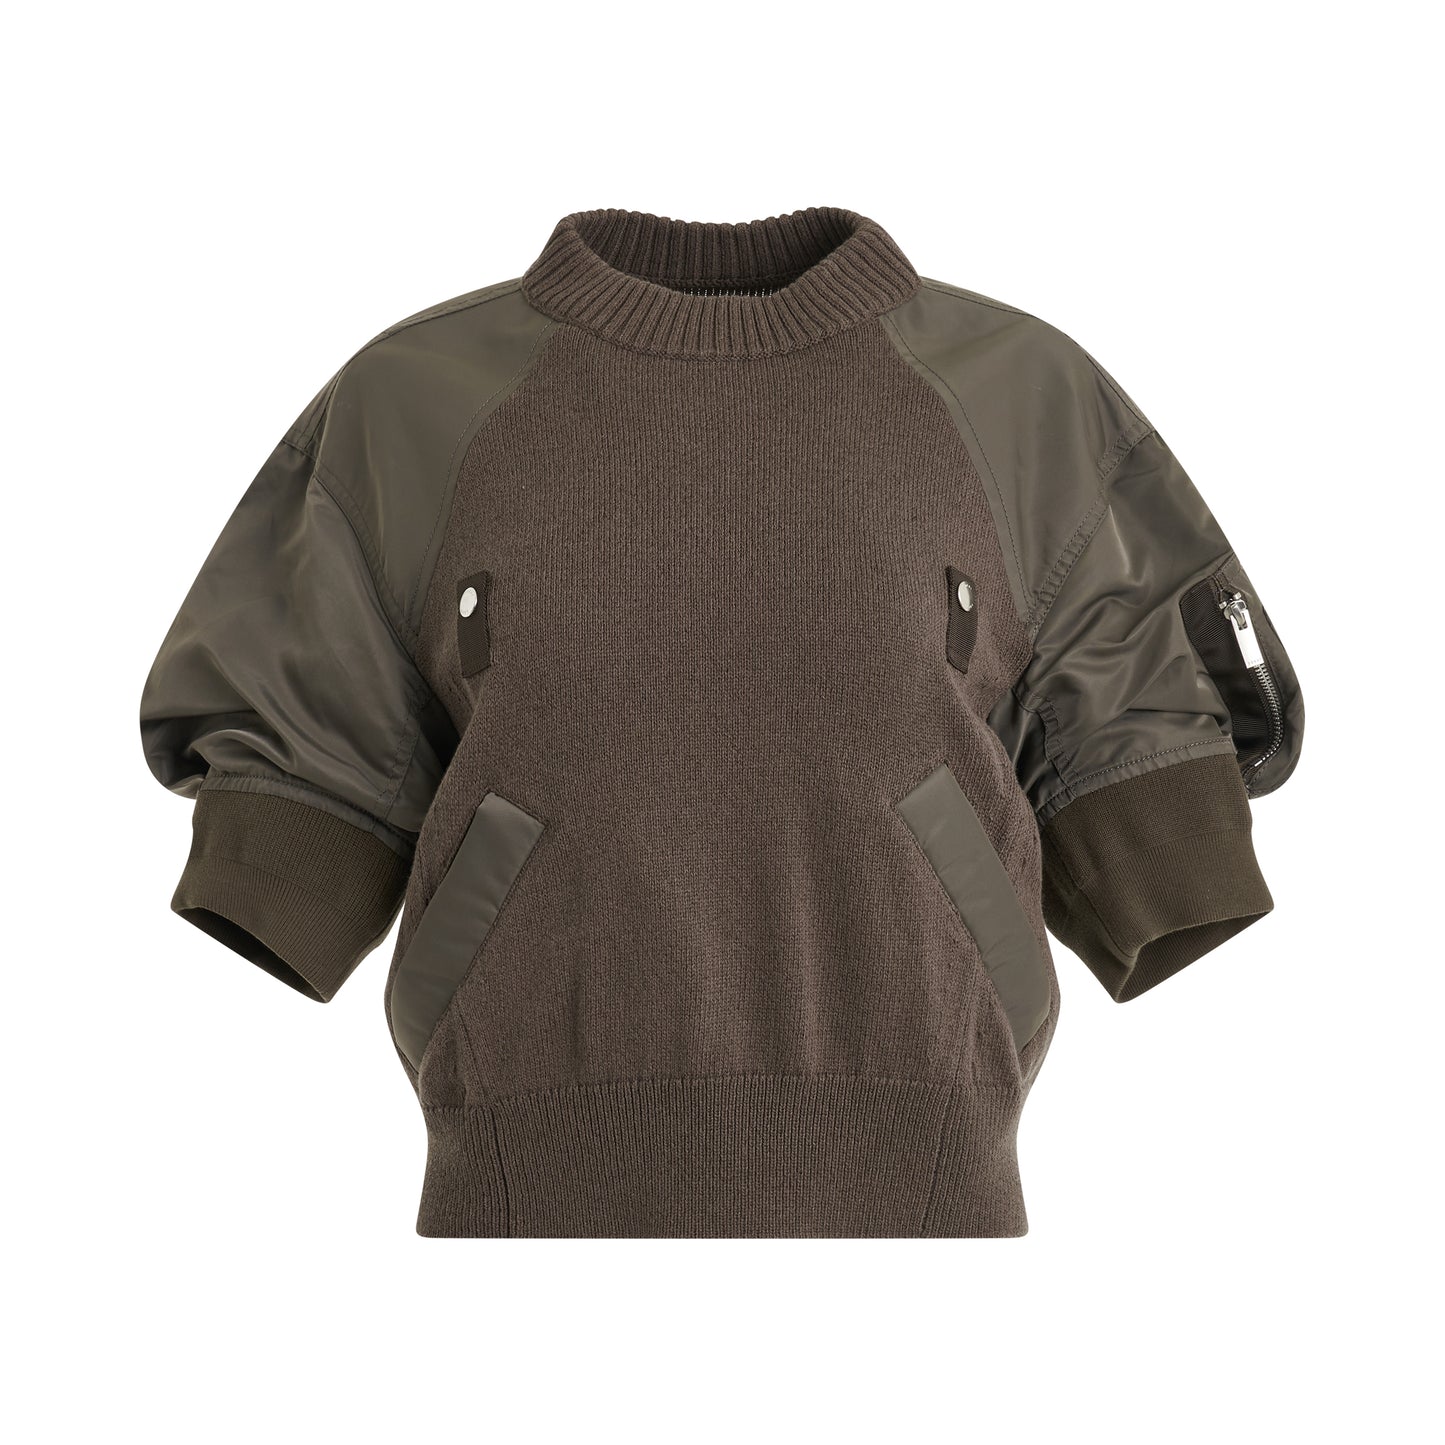 Nylon Twill x Knit Sweater in Taupe